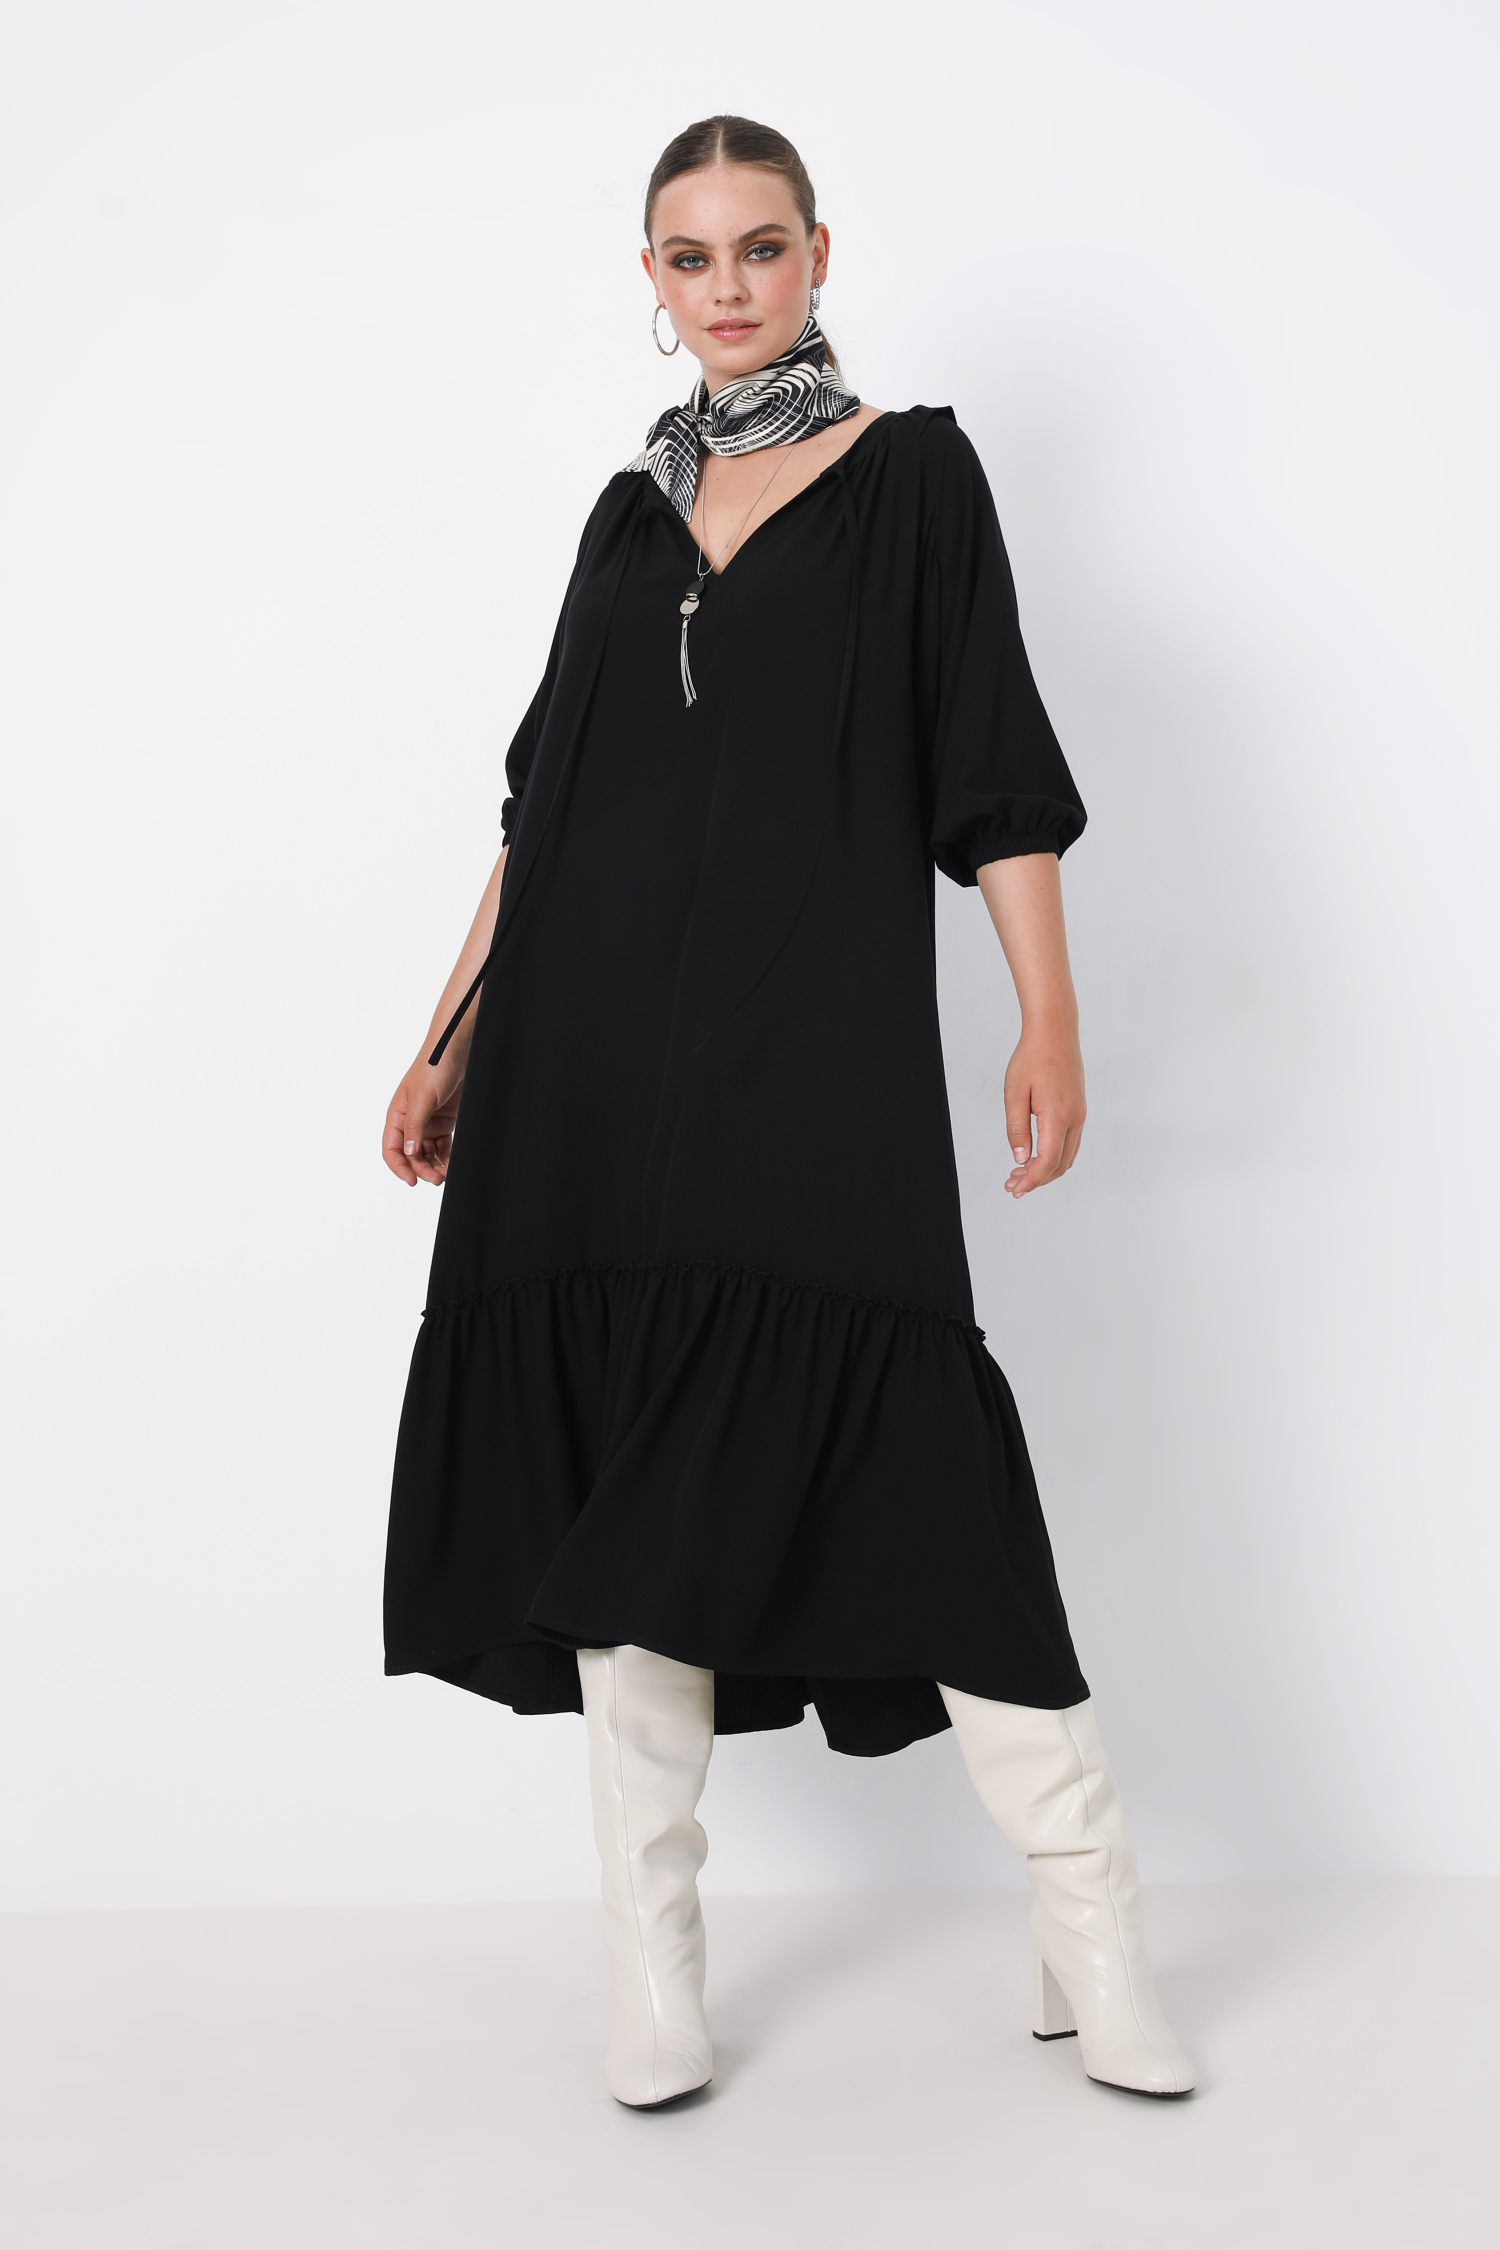 long plain dress with wide ruffle at the bottom (expedition June 15/20)